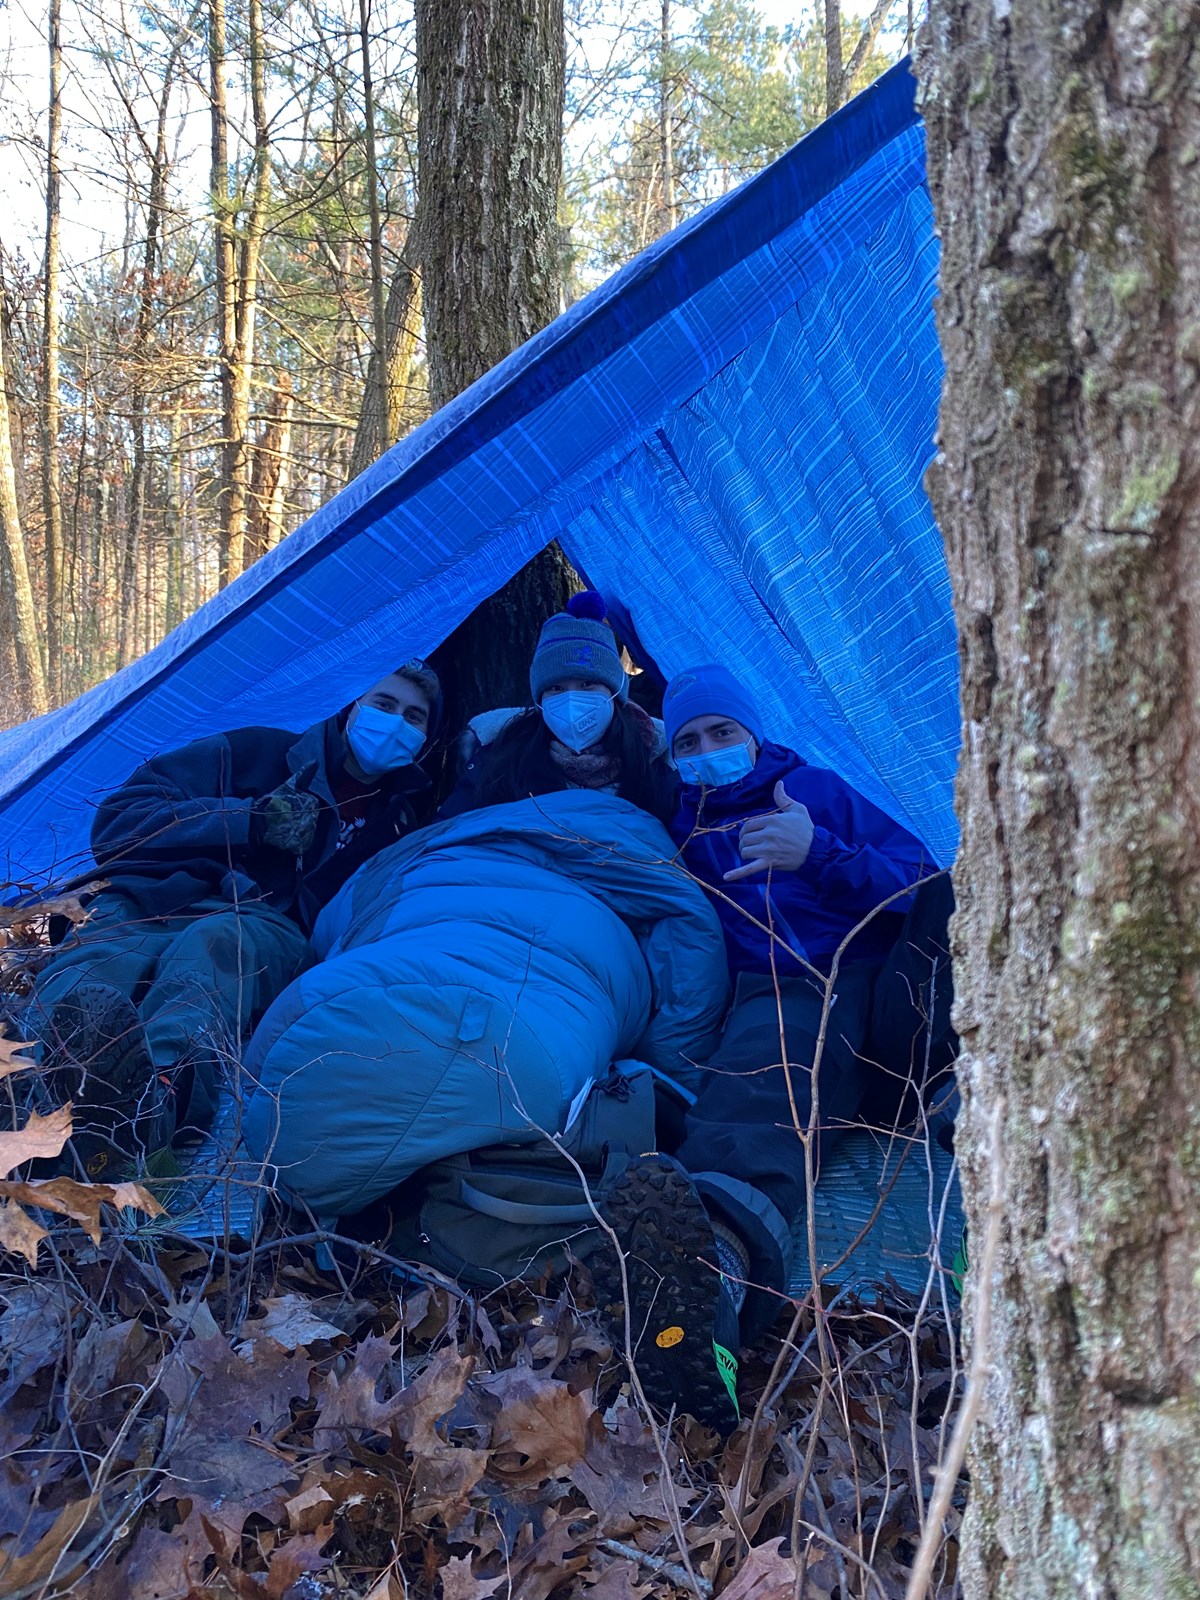 Three people sit outside on the leafy ground under a tarp in a practice medical scenario